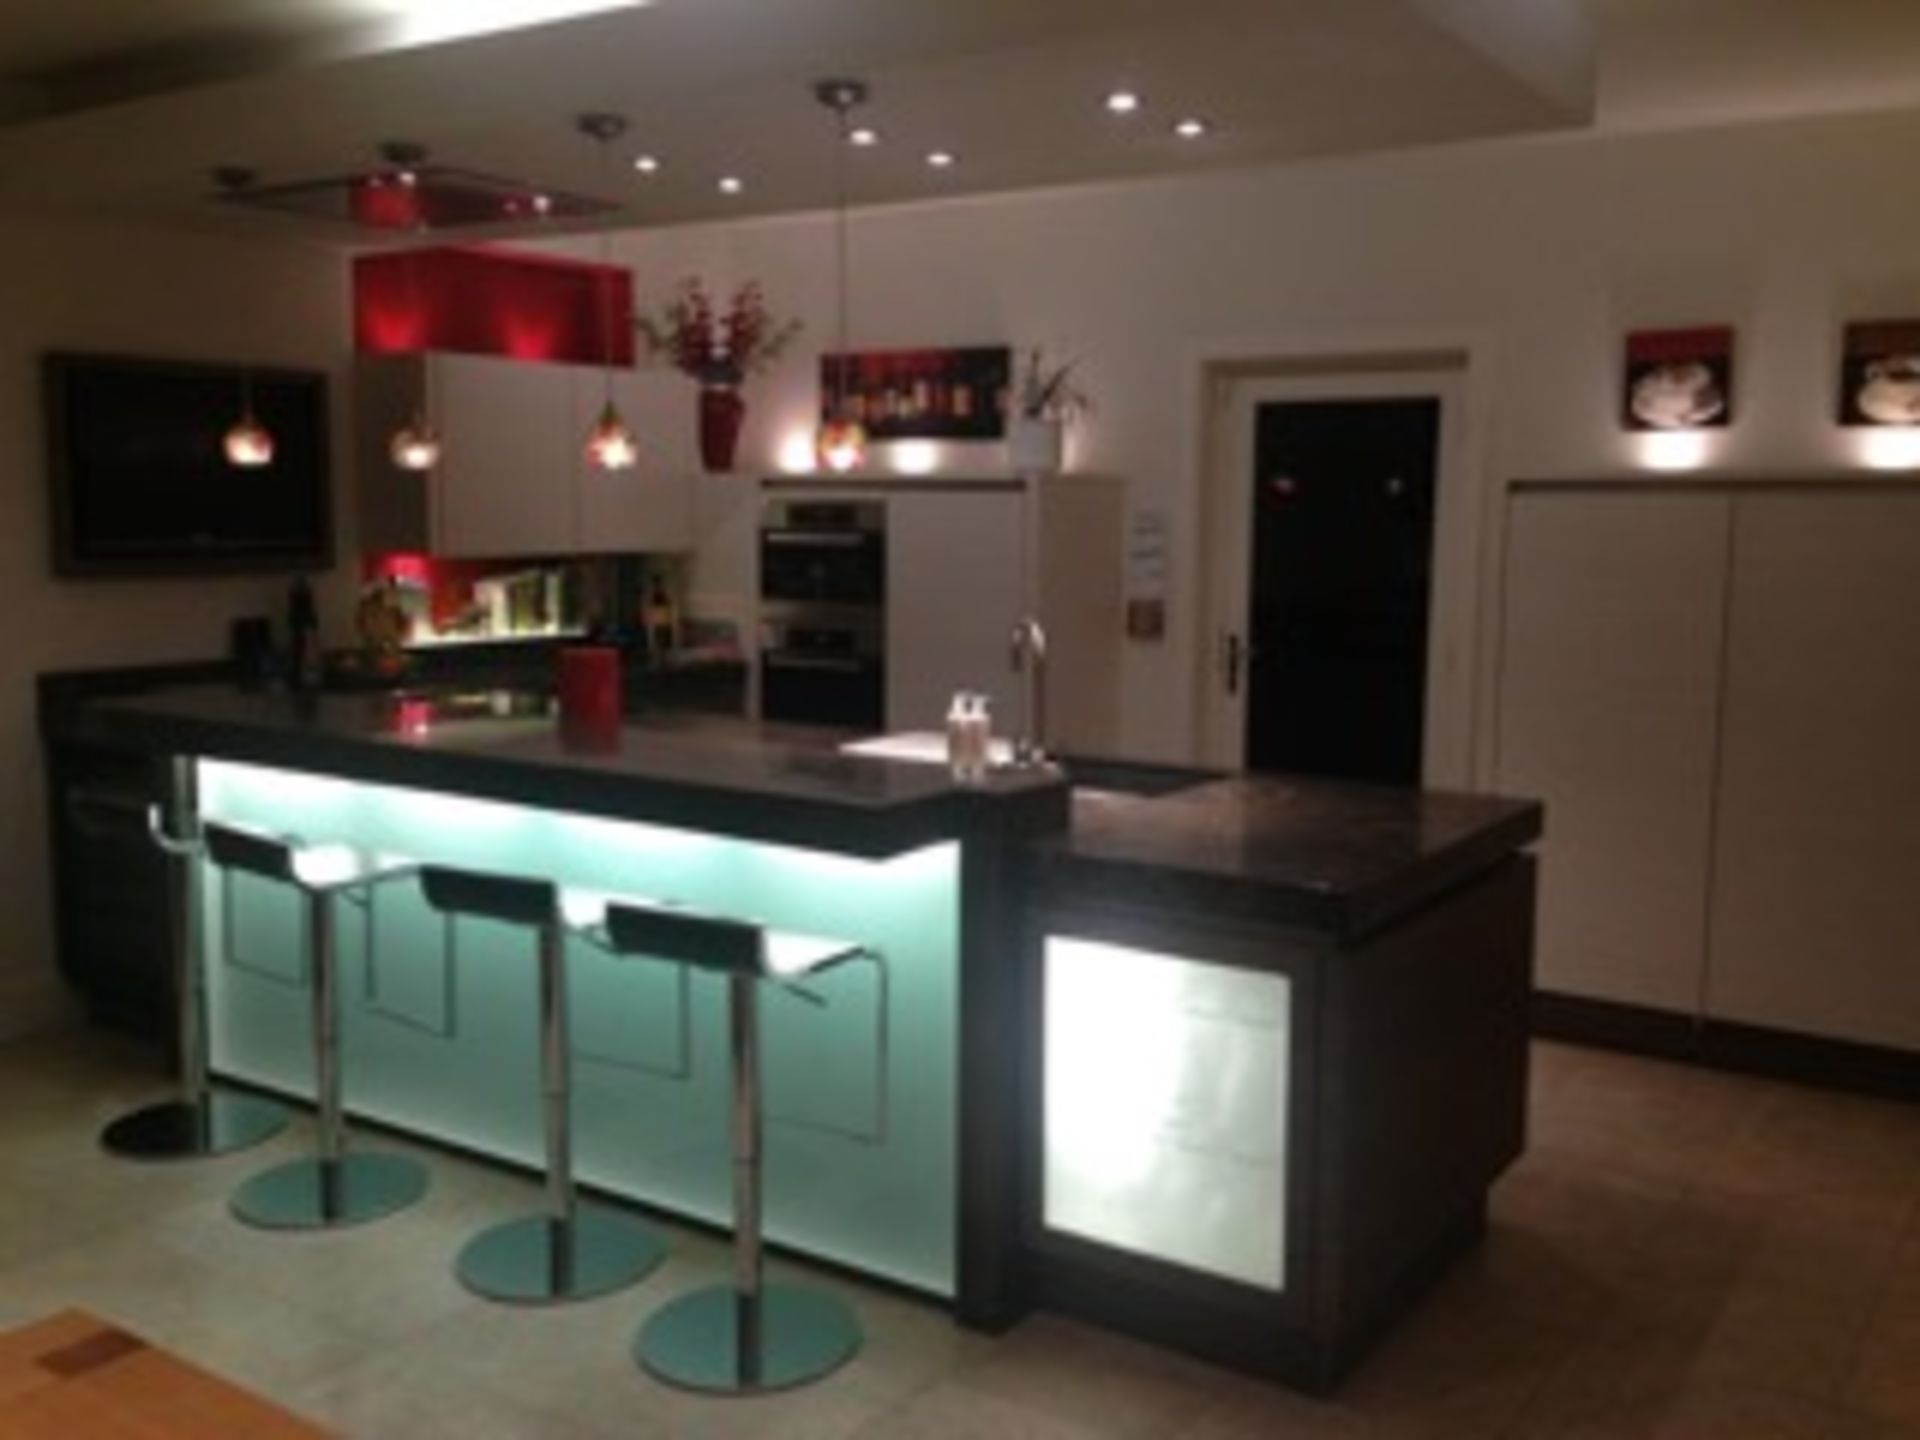 1 x Bespoke SIEMATIC Luxury KITCHEN With MIELE Appliances - Marble Work Surfaces, Zabrano Wood - Image 12 of 24